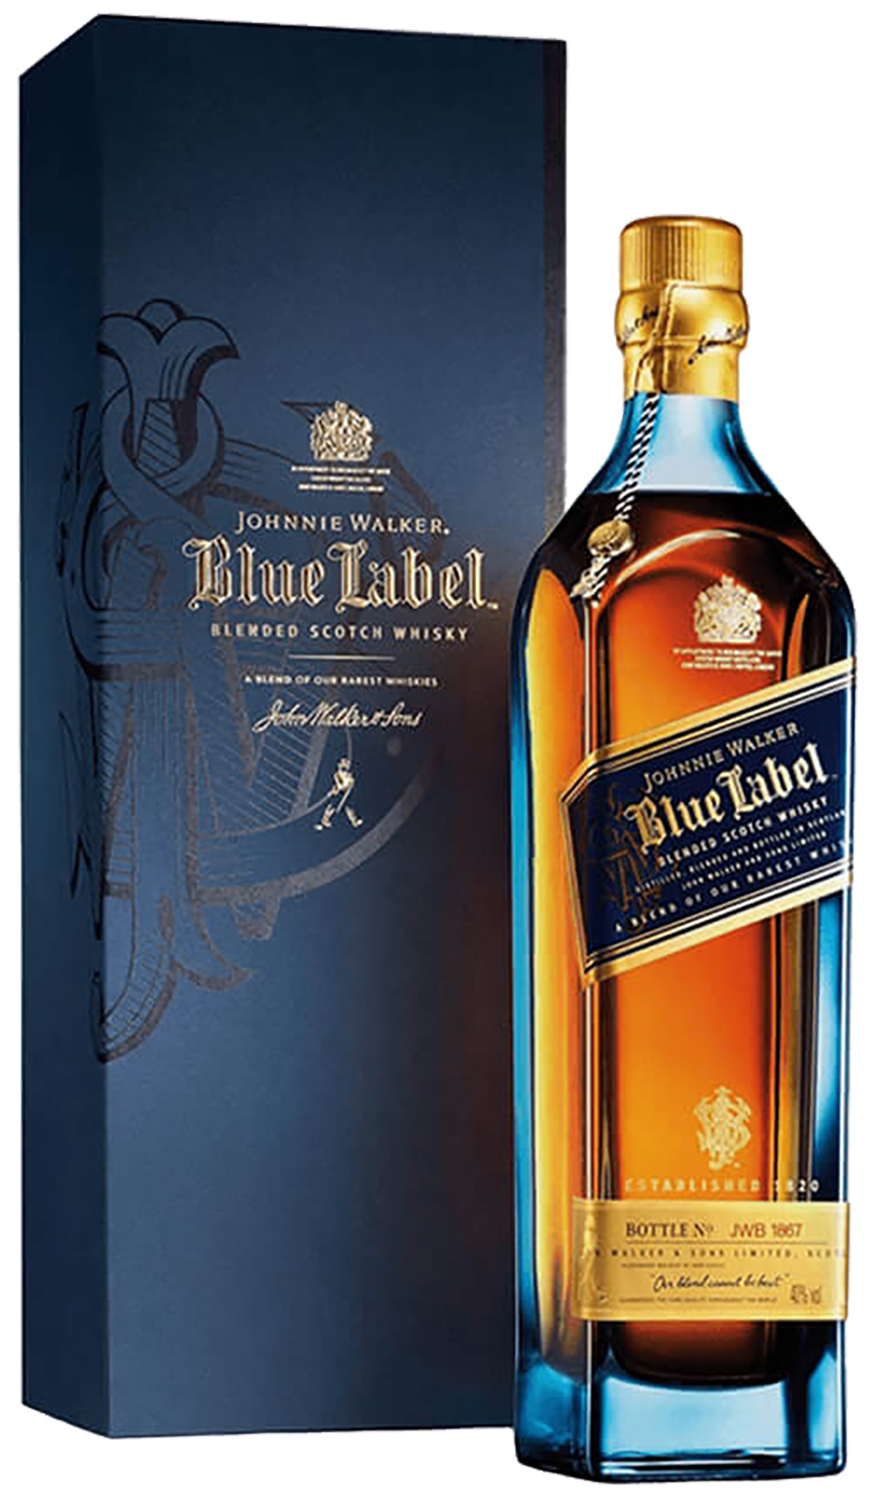 Johnnie Walker Blue Label Blended Scotch Whisky (gift box) johnnie walker red label blended scotch whisky gift box with 1 glass